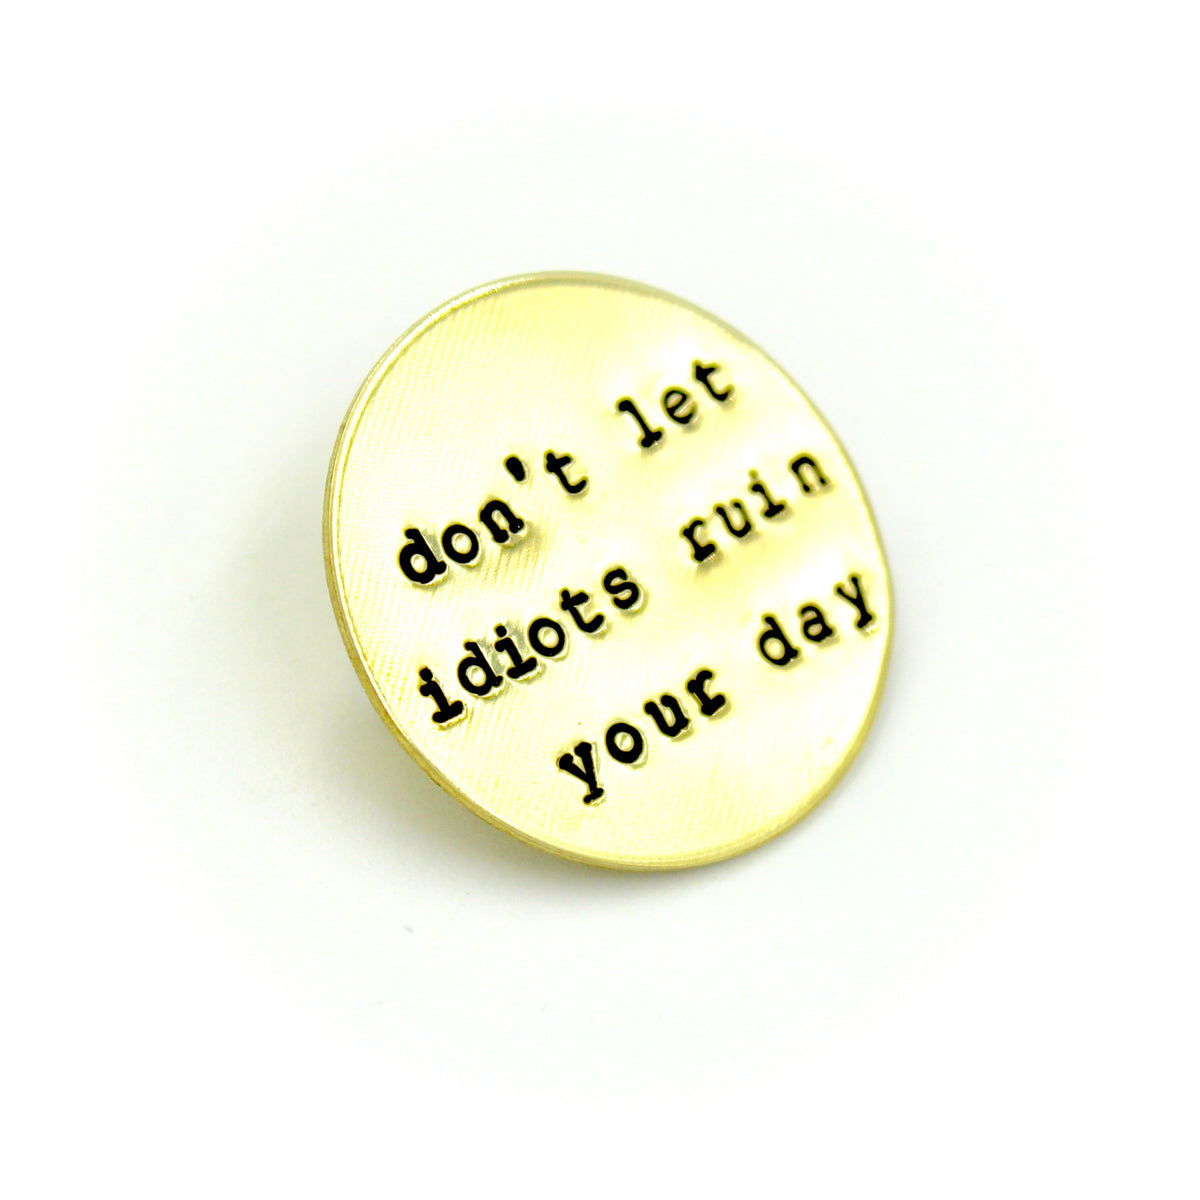 Don't Let Idiots Ruin Your Day Pin